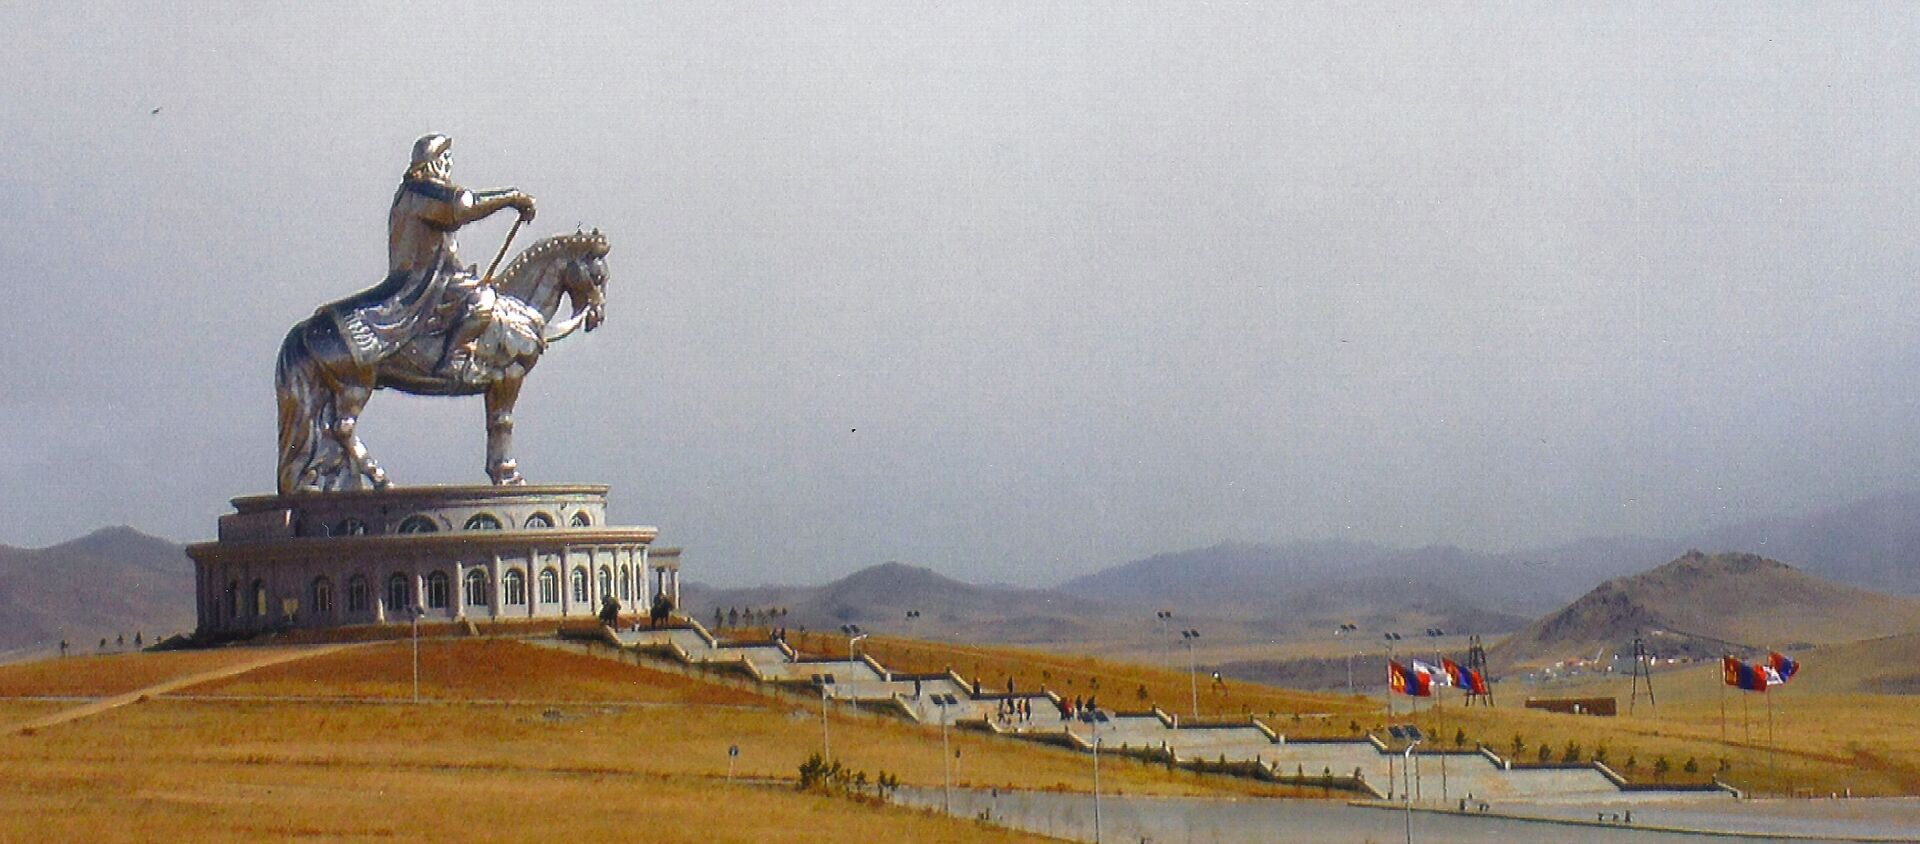 This May 1, 2015 photo shows the 40-metre (131-foot) tall Genghis Khan Equestrian Statue at the Genghis Khan Statue Complex 30 miles from Ulaanbaatar, Mongolia.  - Sputnik International, 1920, 15.03.2021